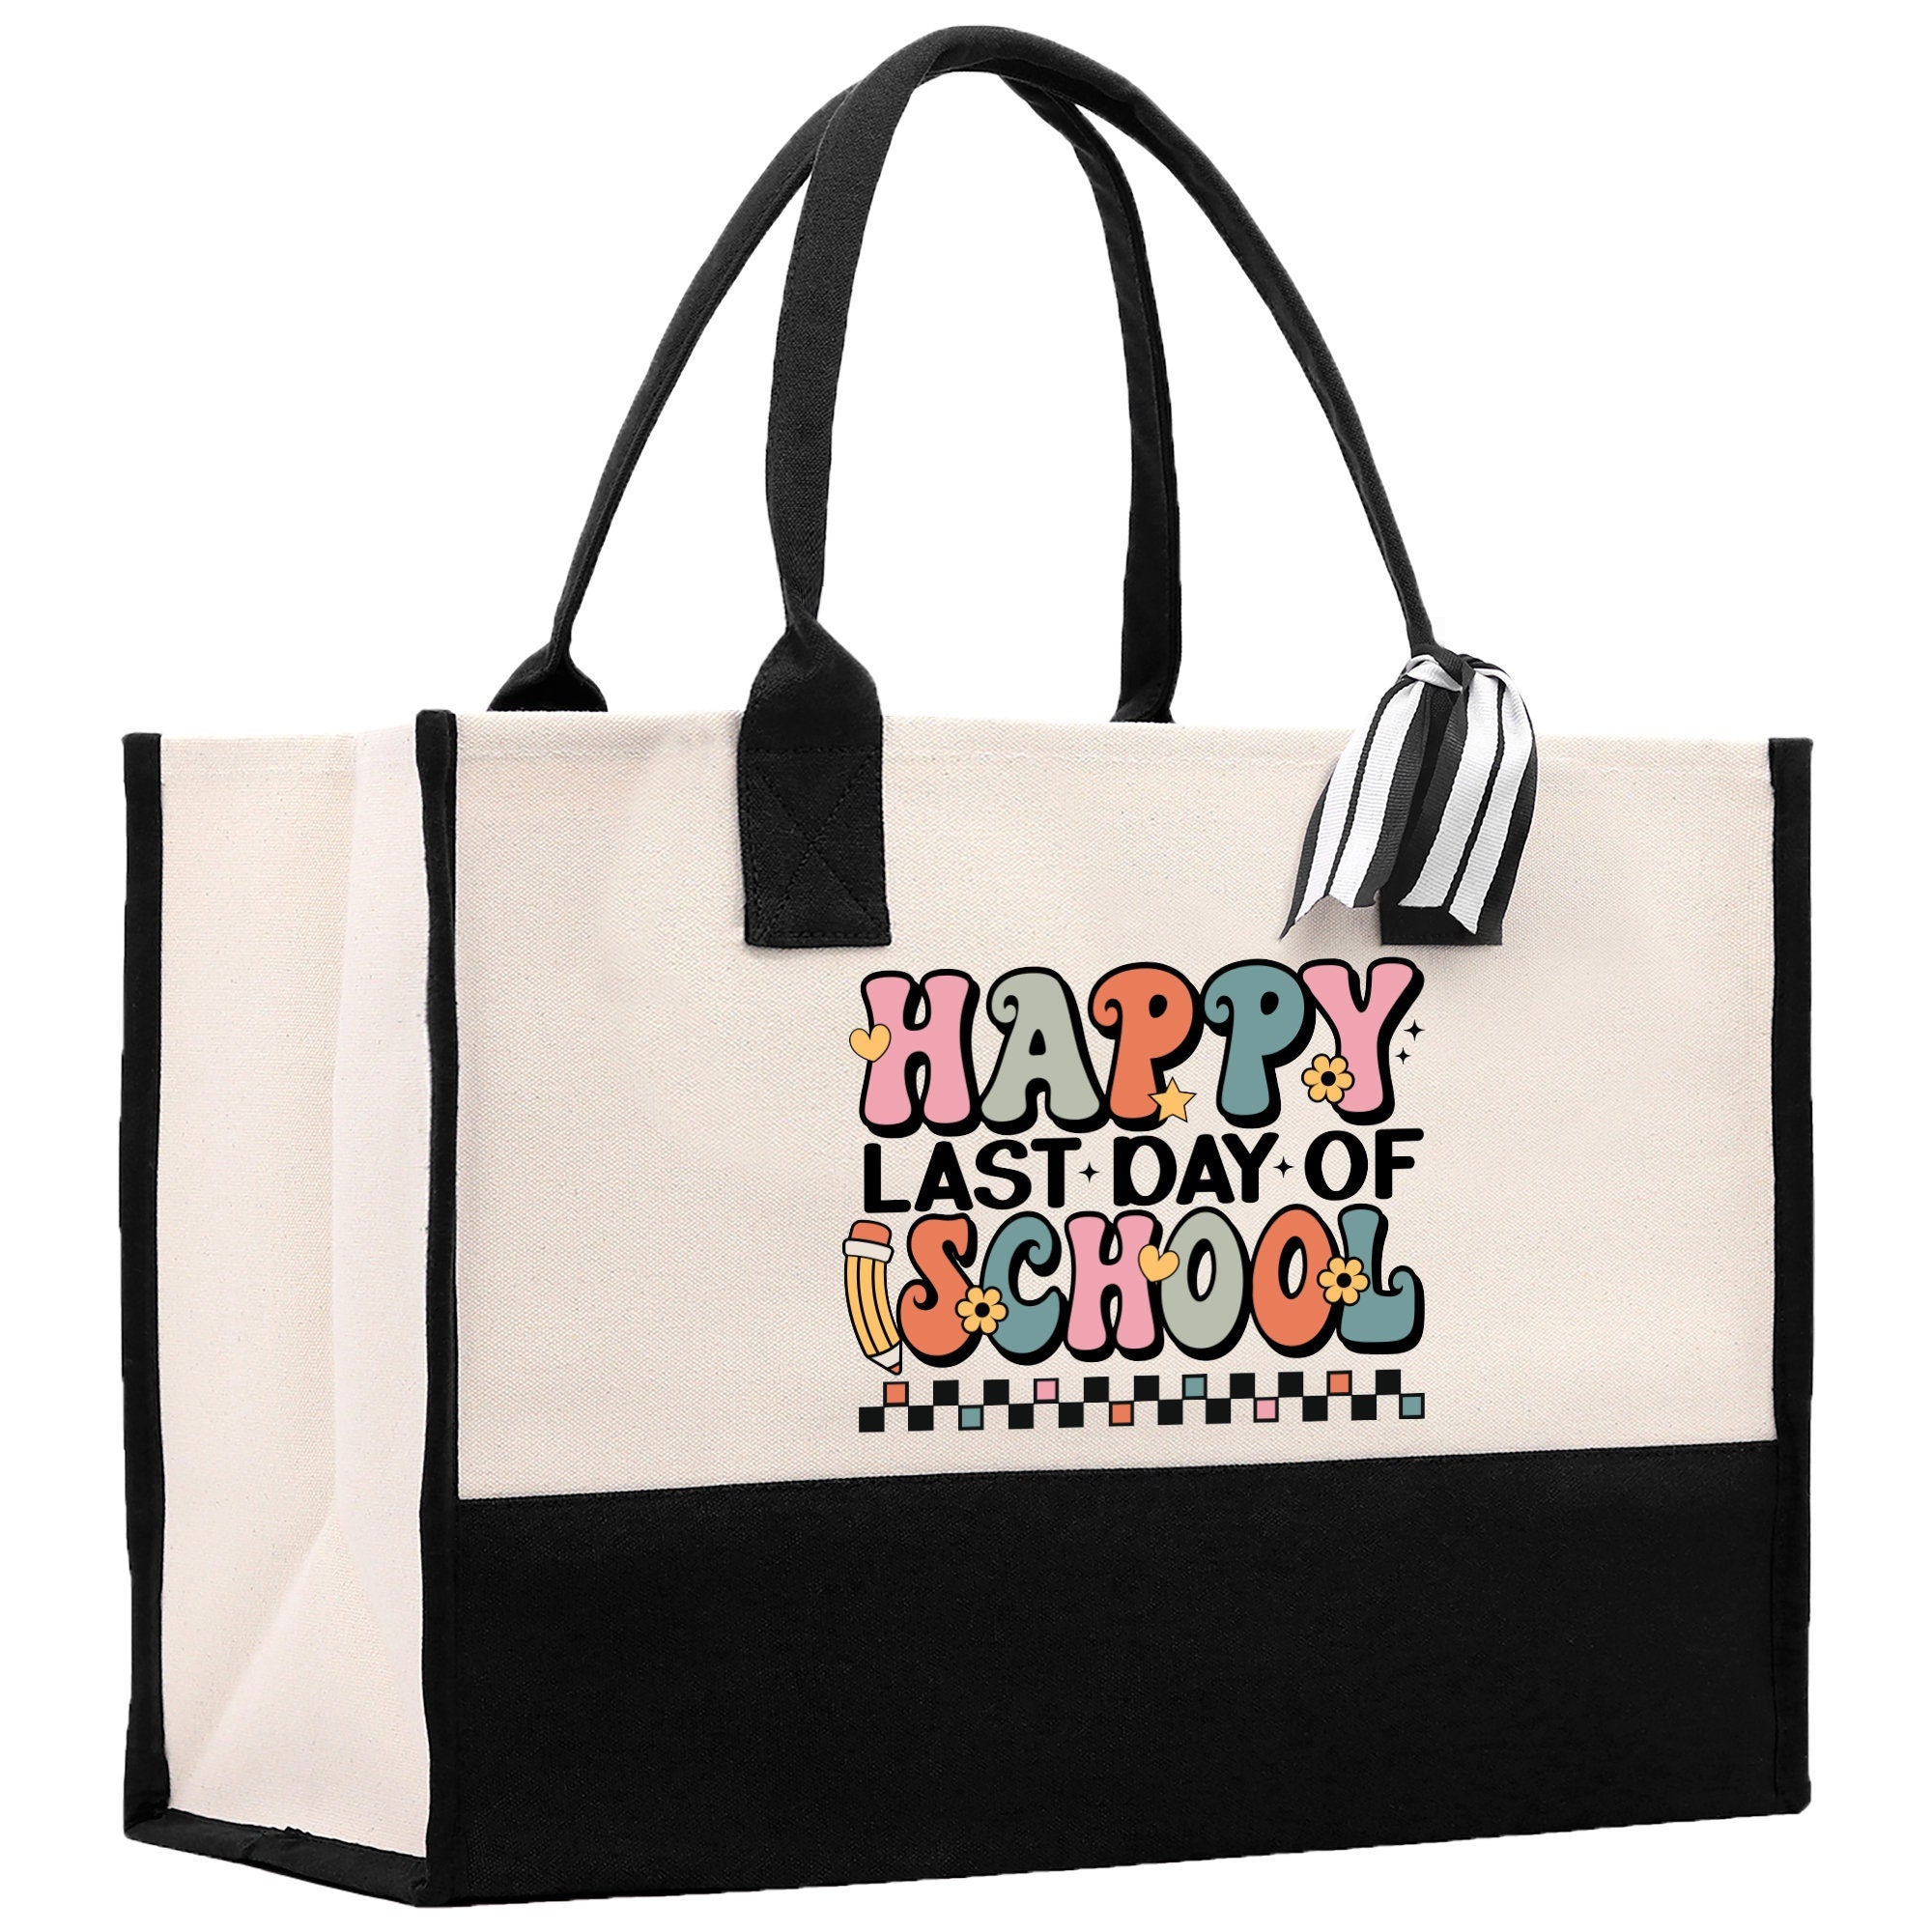 a black and white bag with a happy last day of school message